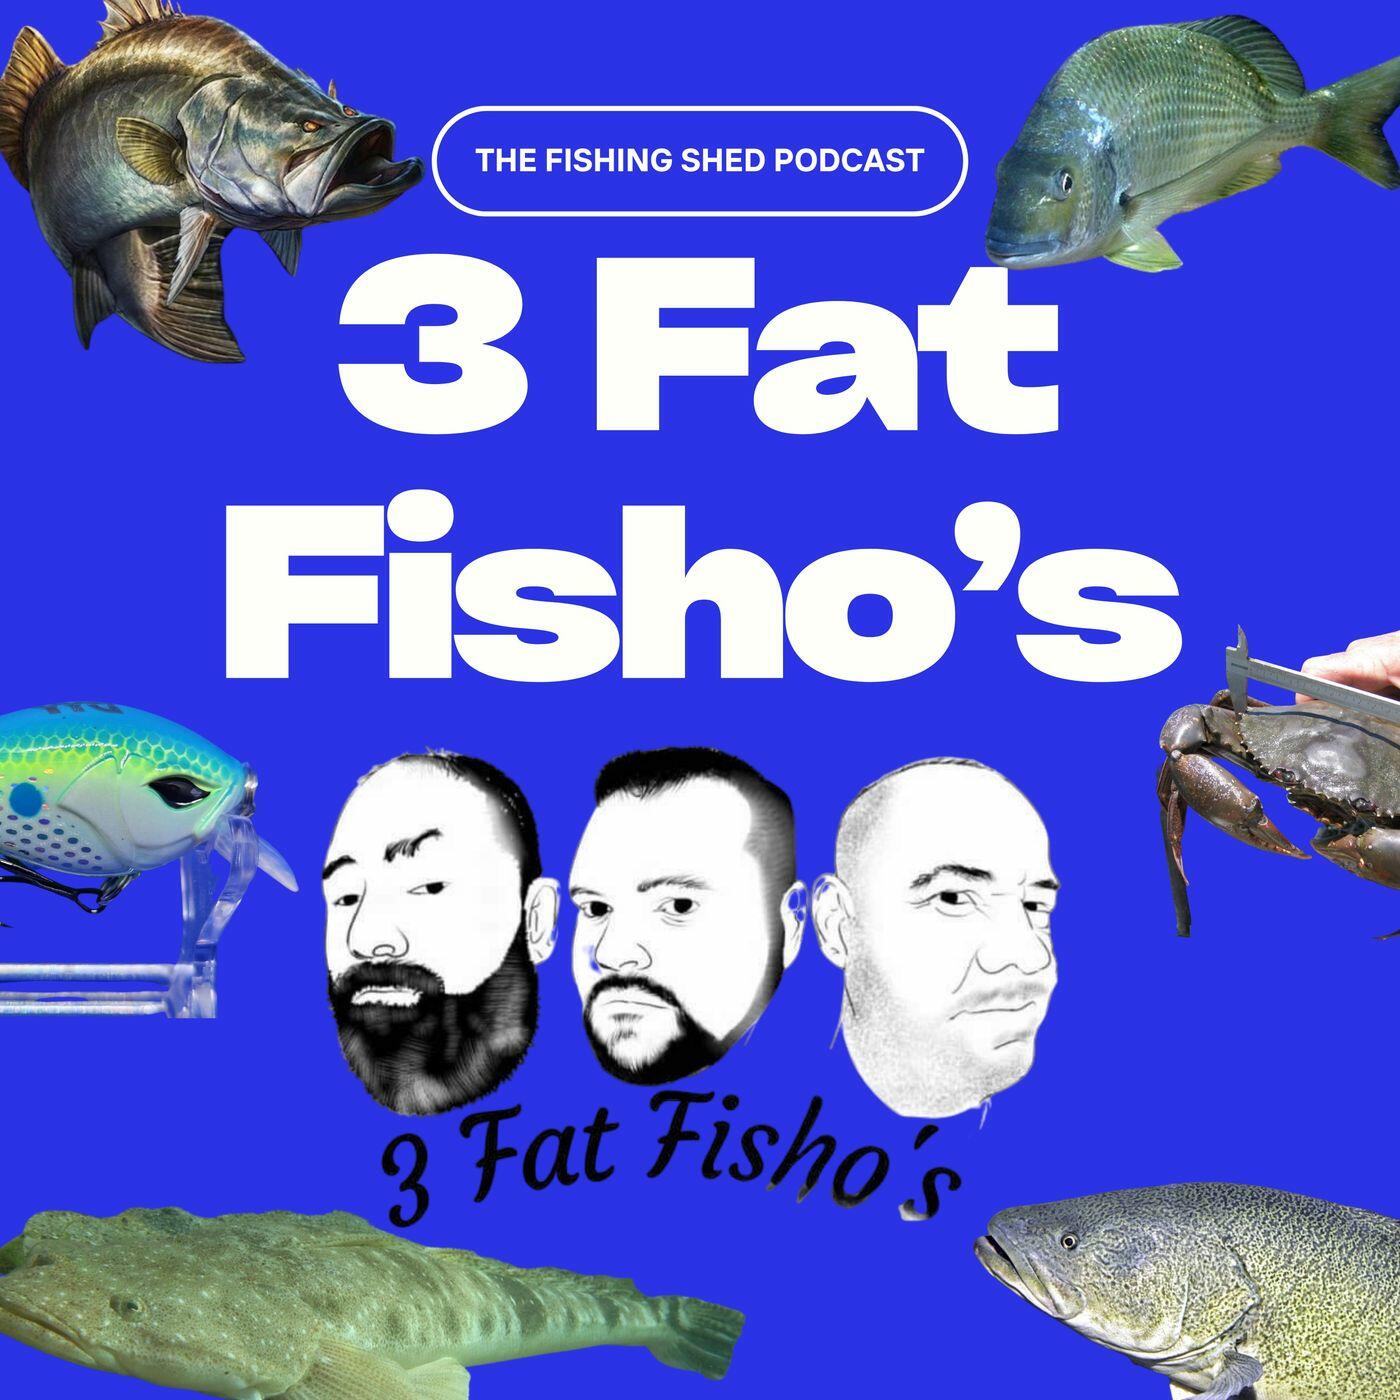 The Fishing Shed Podcast - Presented by the 3 Fat Fisho's